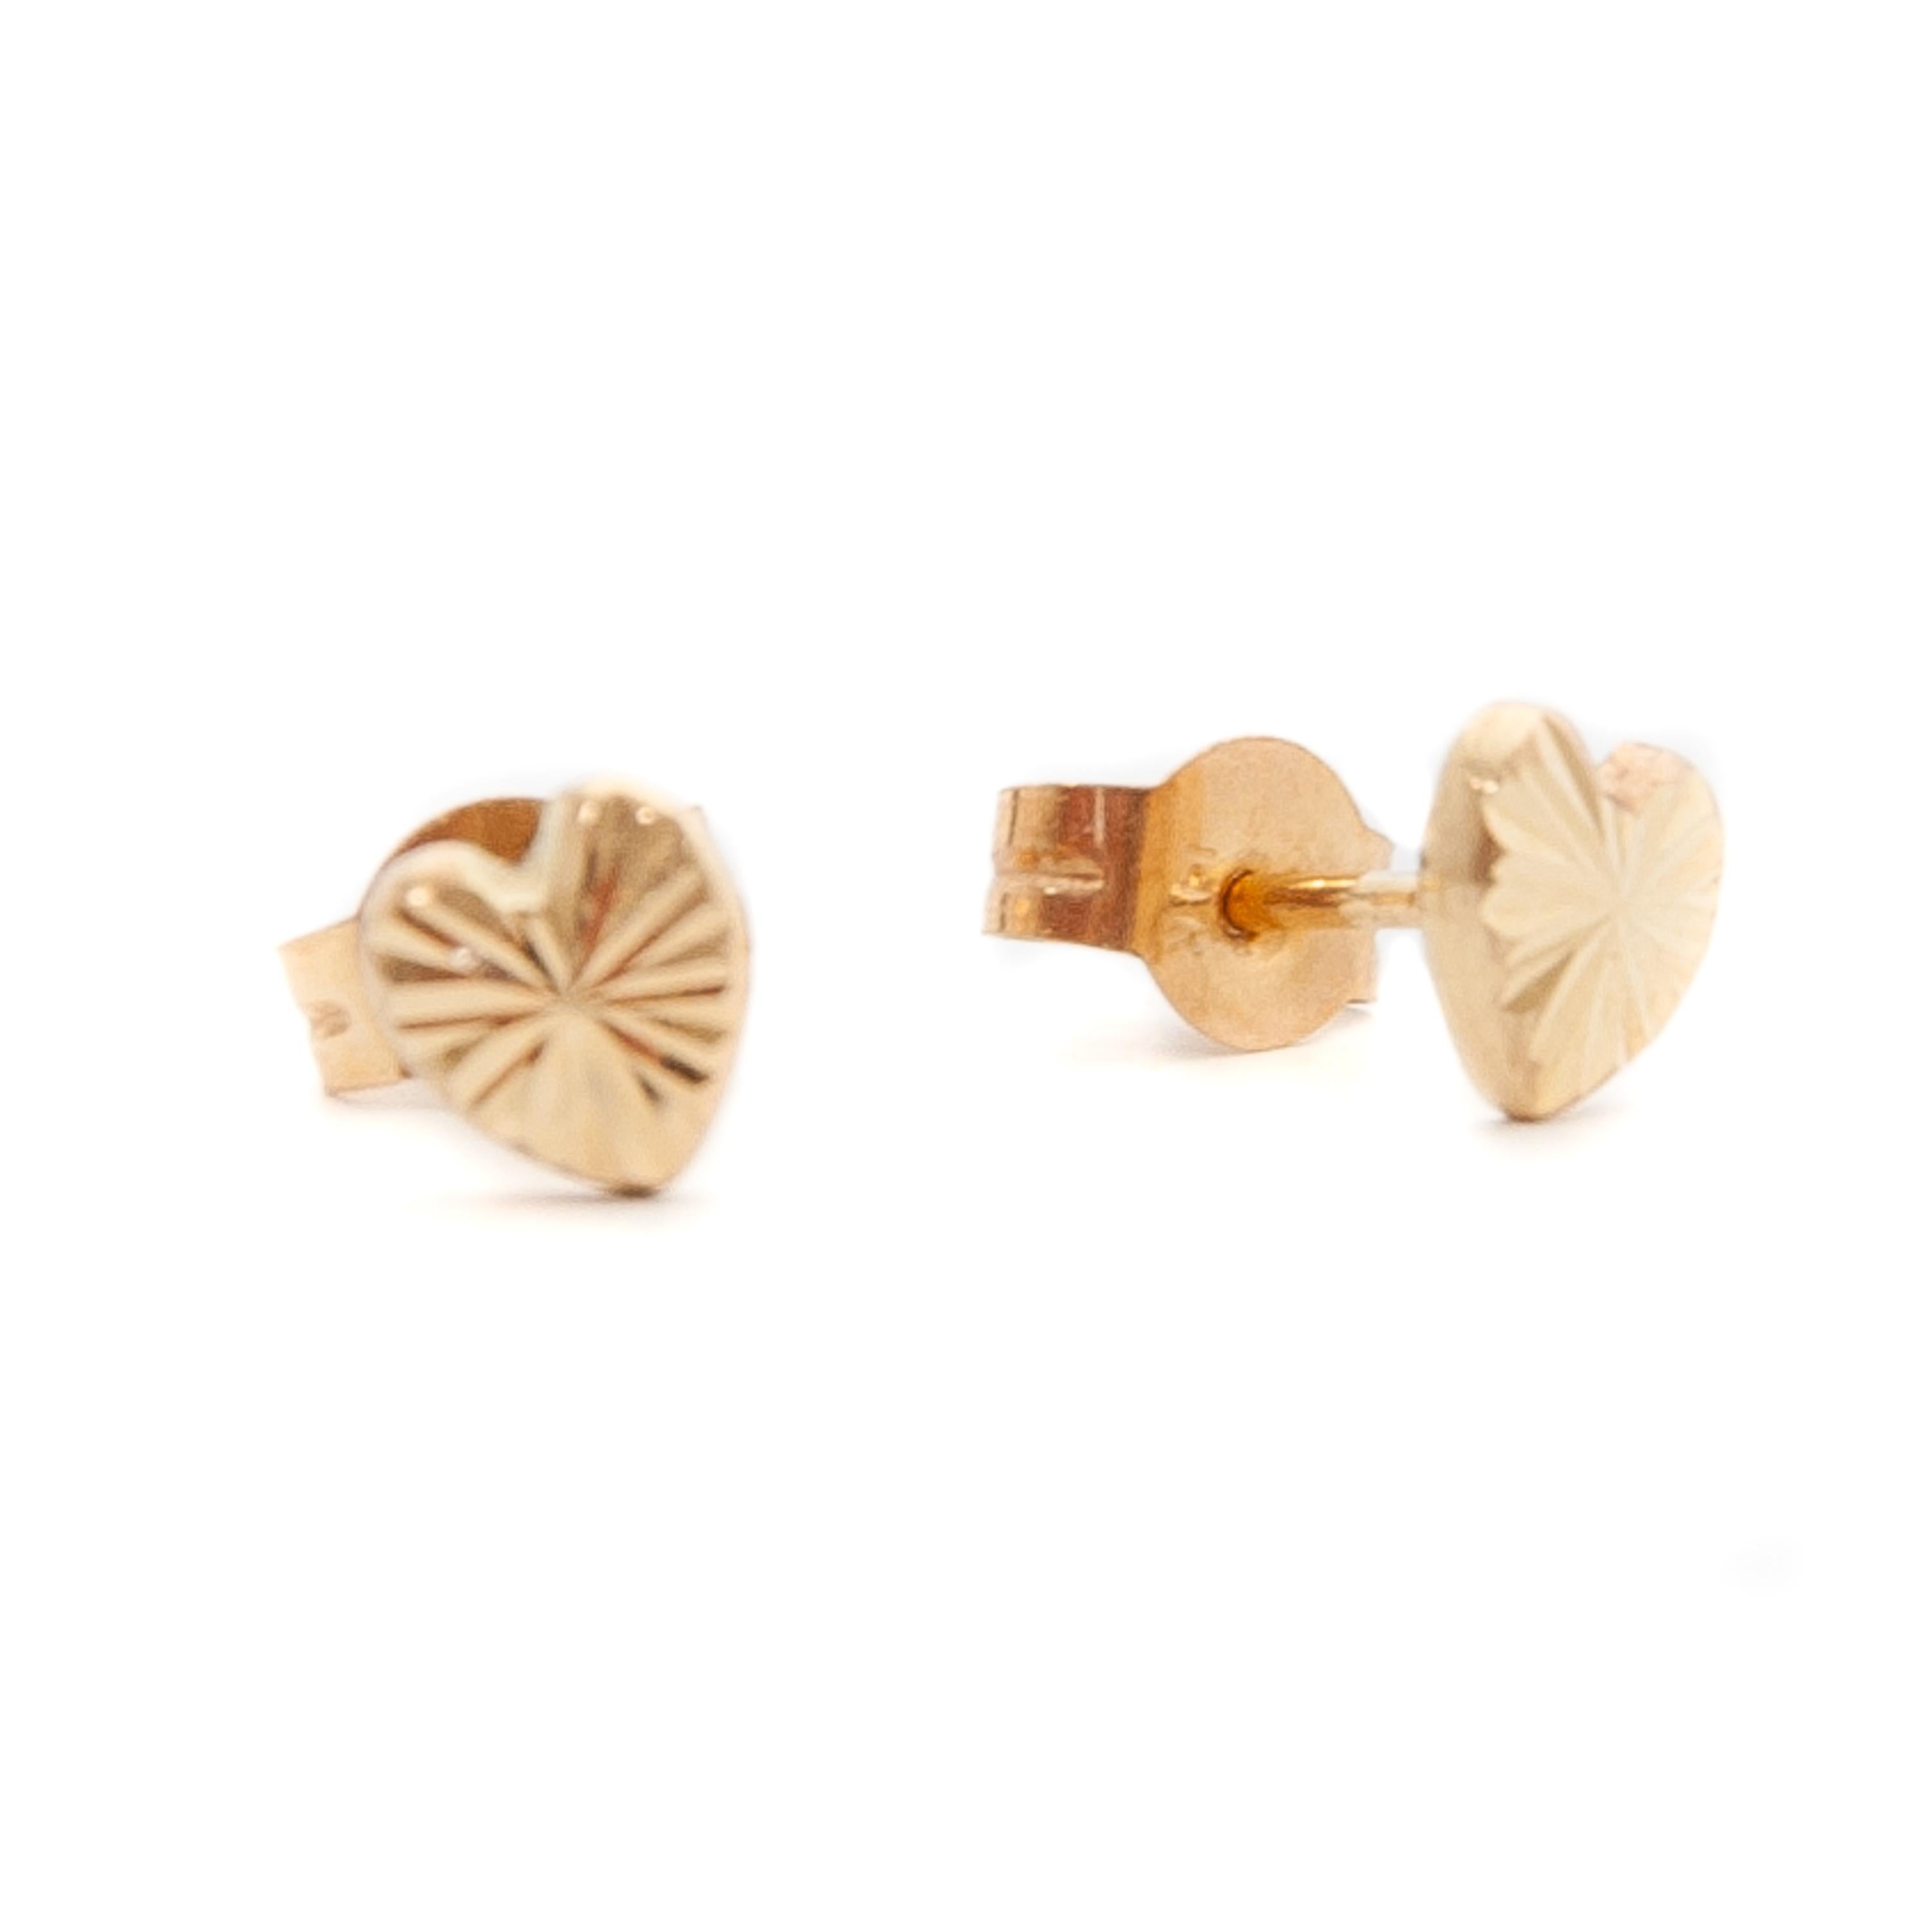 These lovely heart-shaped stud earring are made of 14 karat yellow gold. This timeless symbol of love is delicately detailed with a sunburst engraving. The earrings have a push back closure and are super wearable with any outfit. They also can be